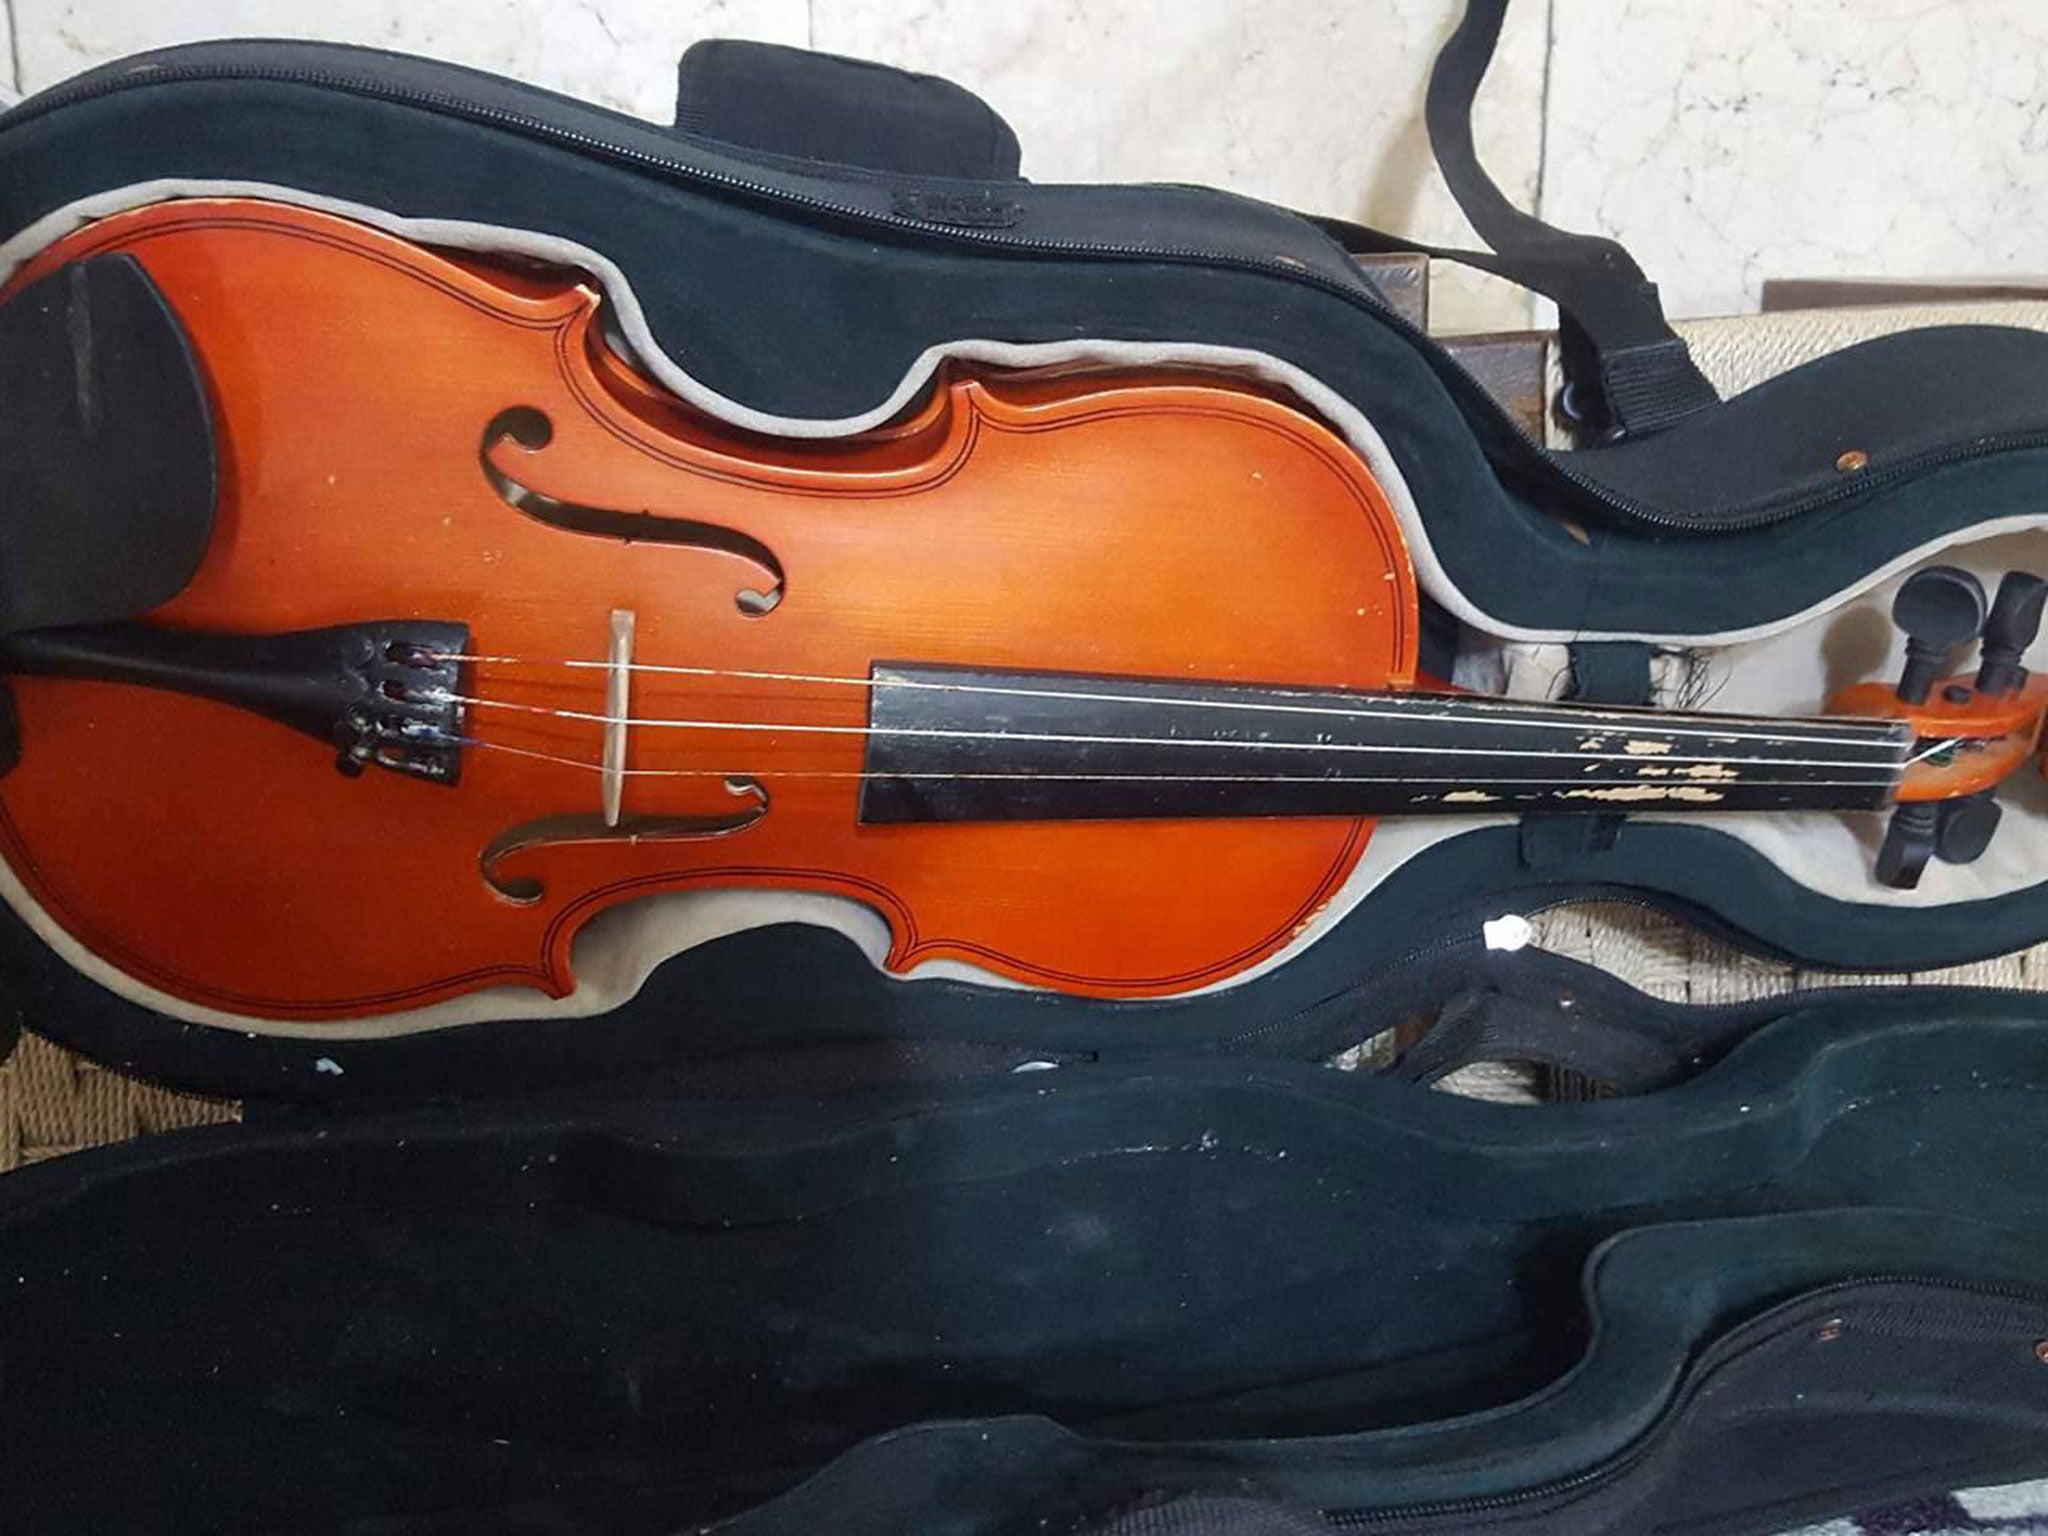 ‘He loved the violin so much, he didn’t let it go even when he drowned’